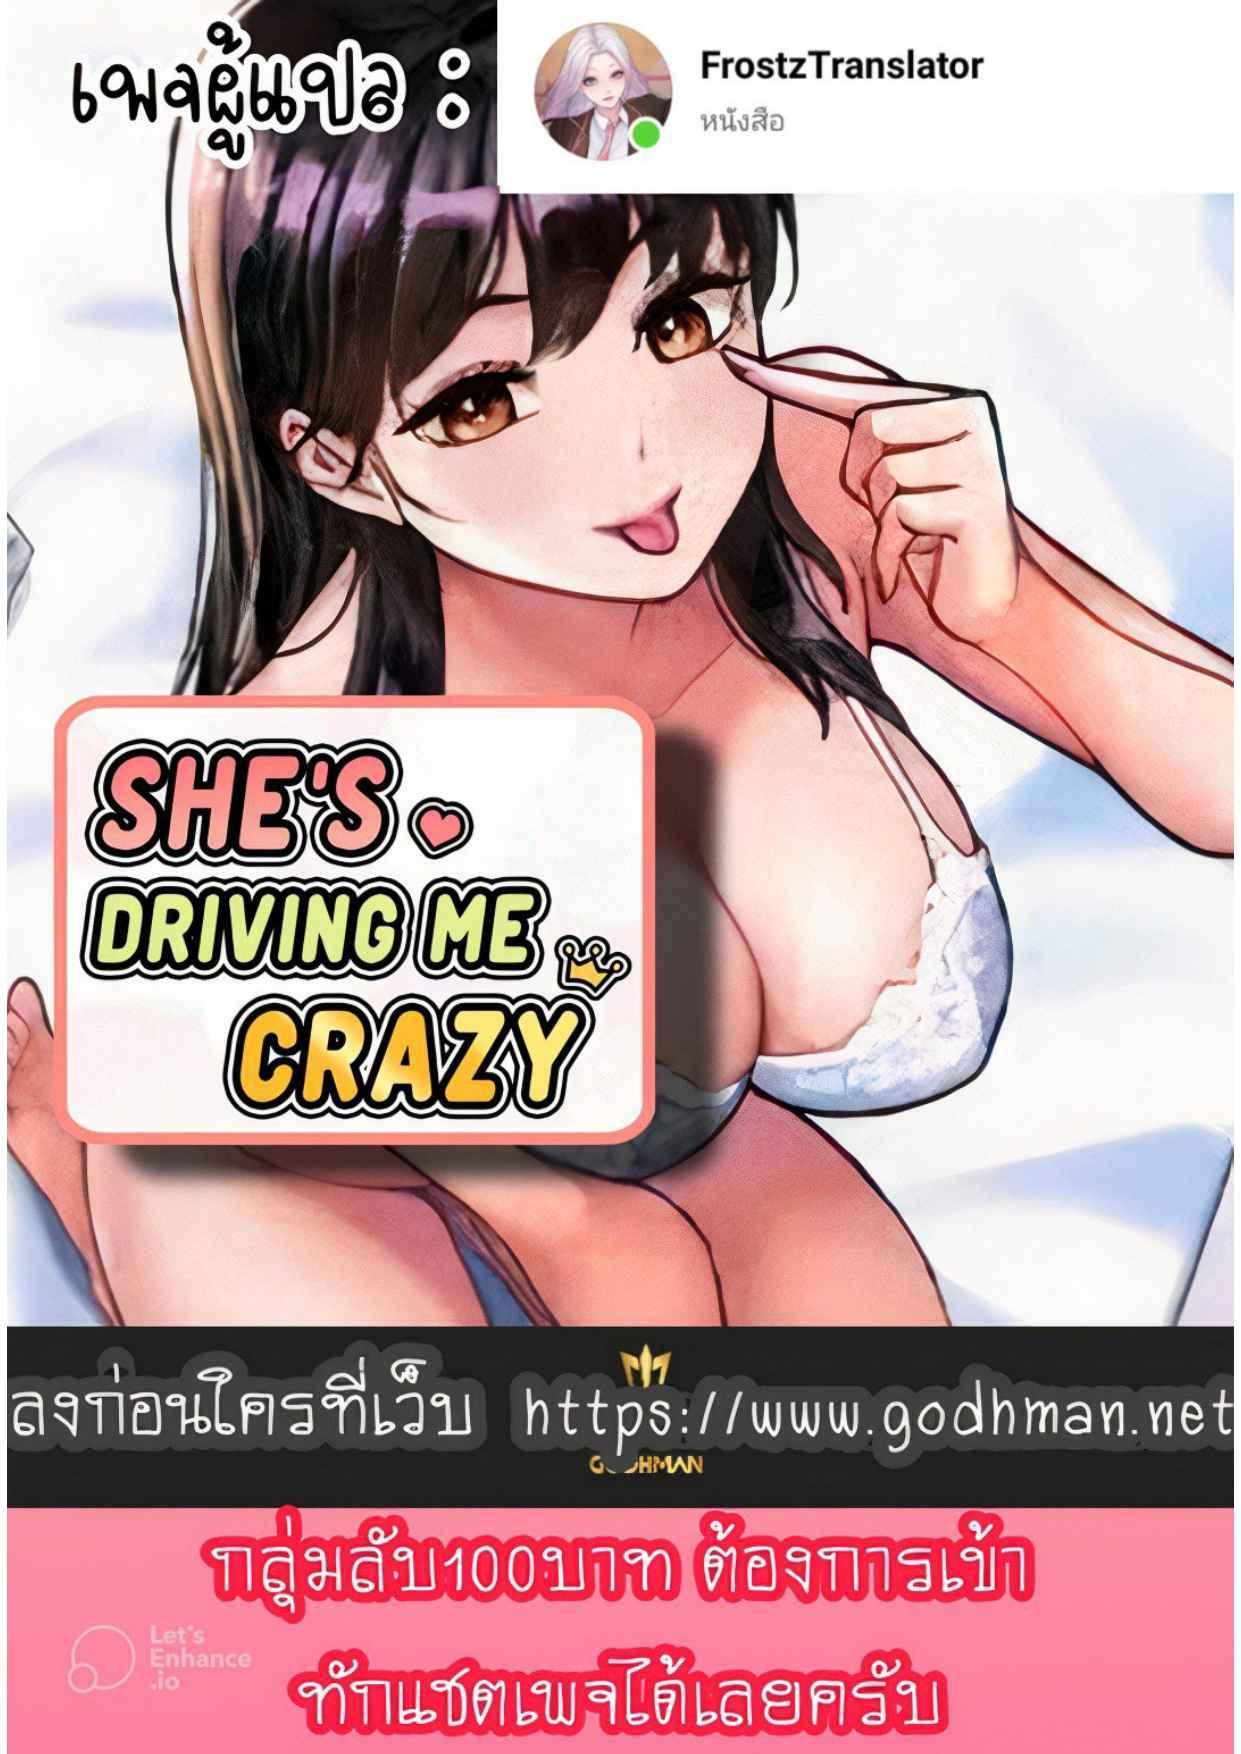 She’s Driving Me Crazy 36 001